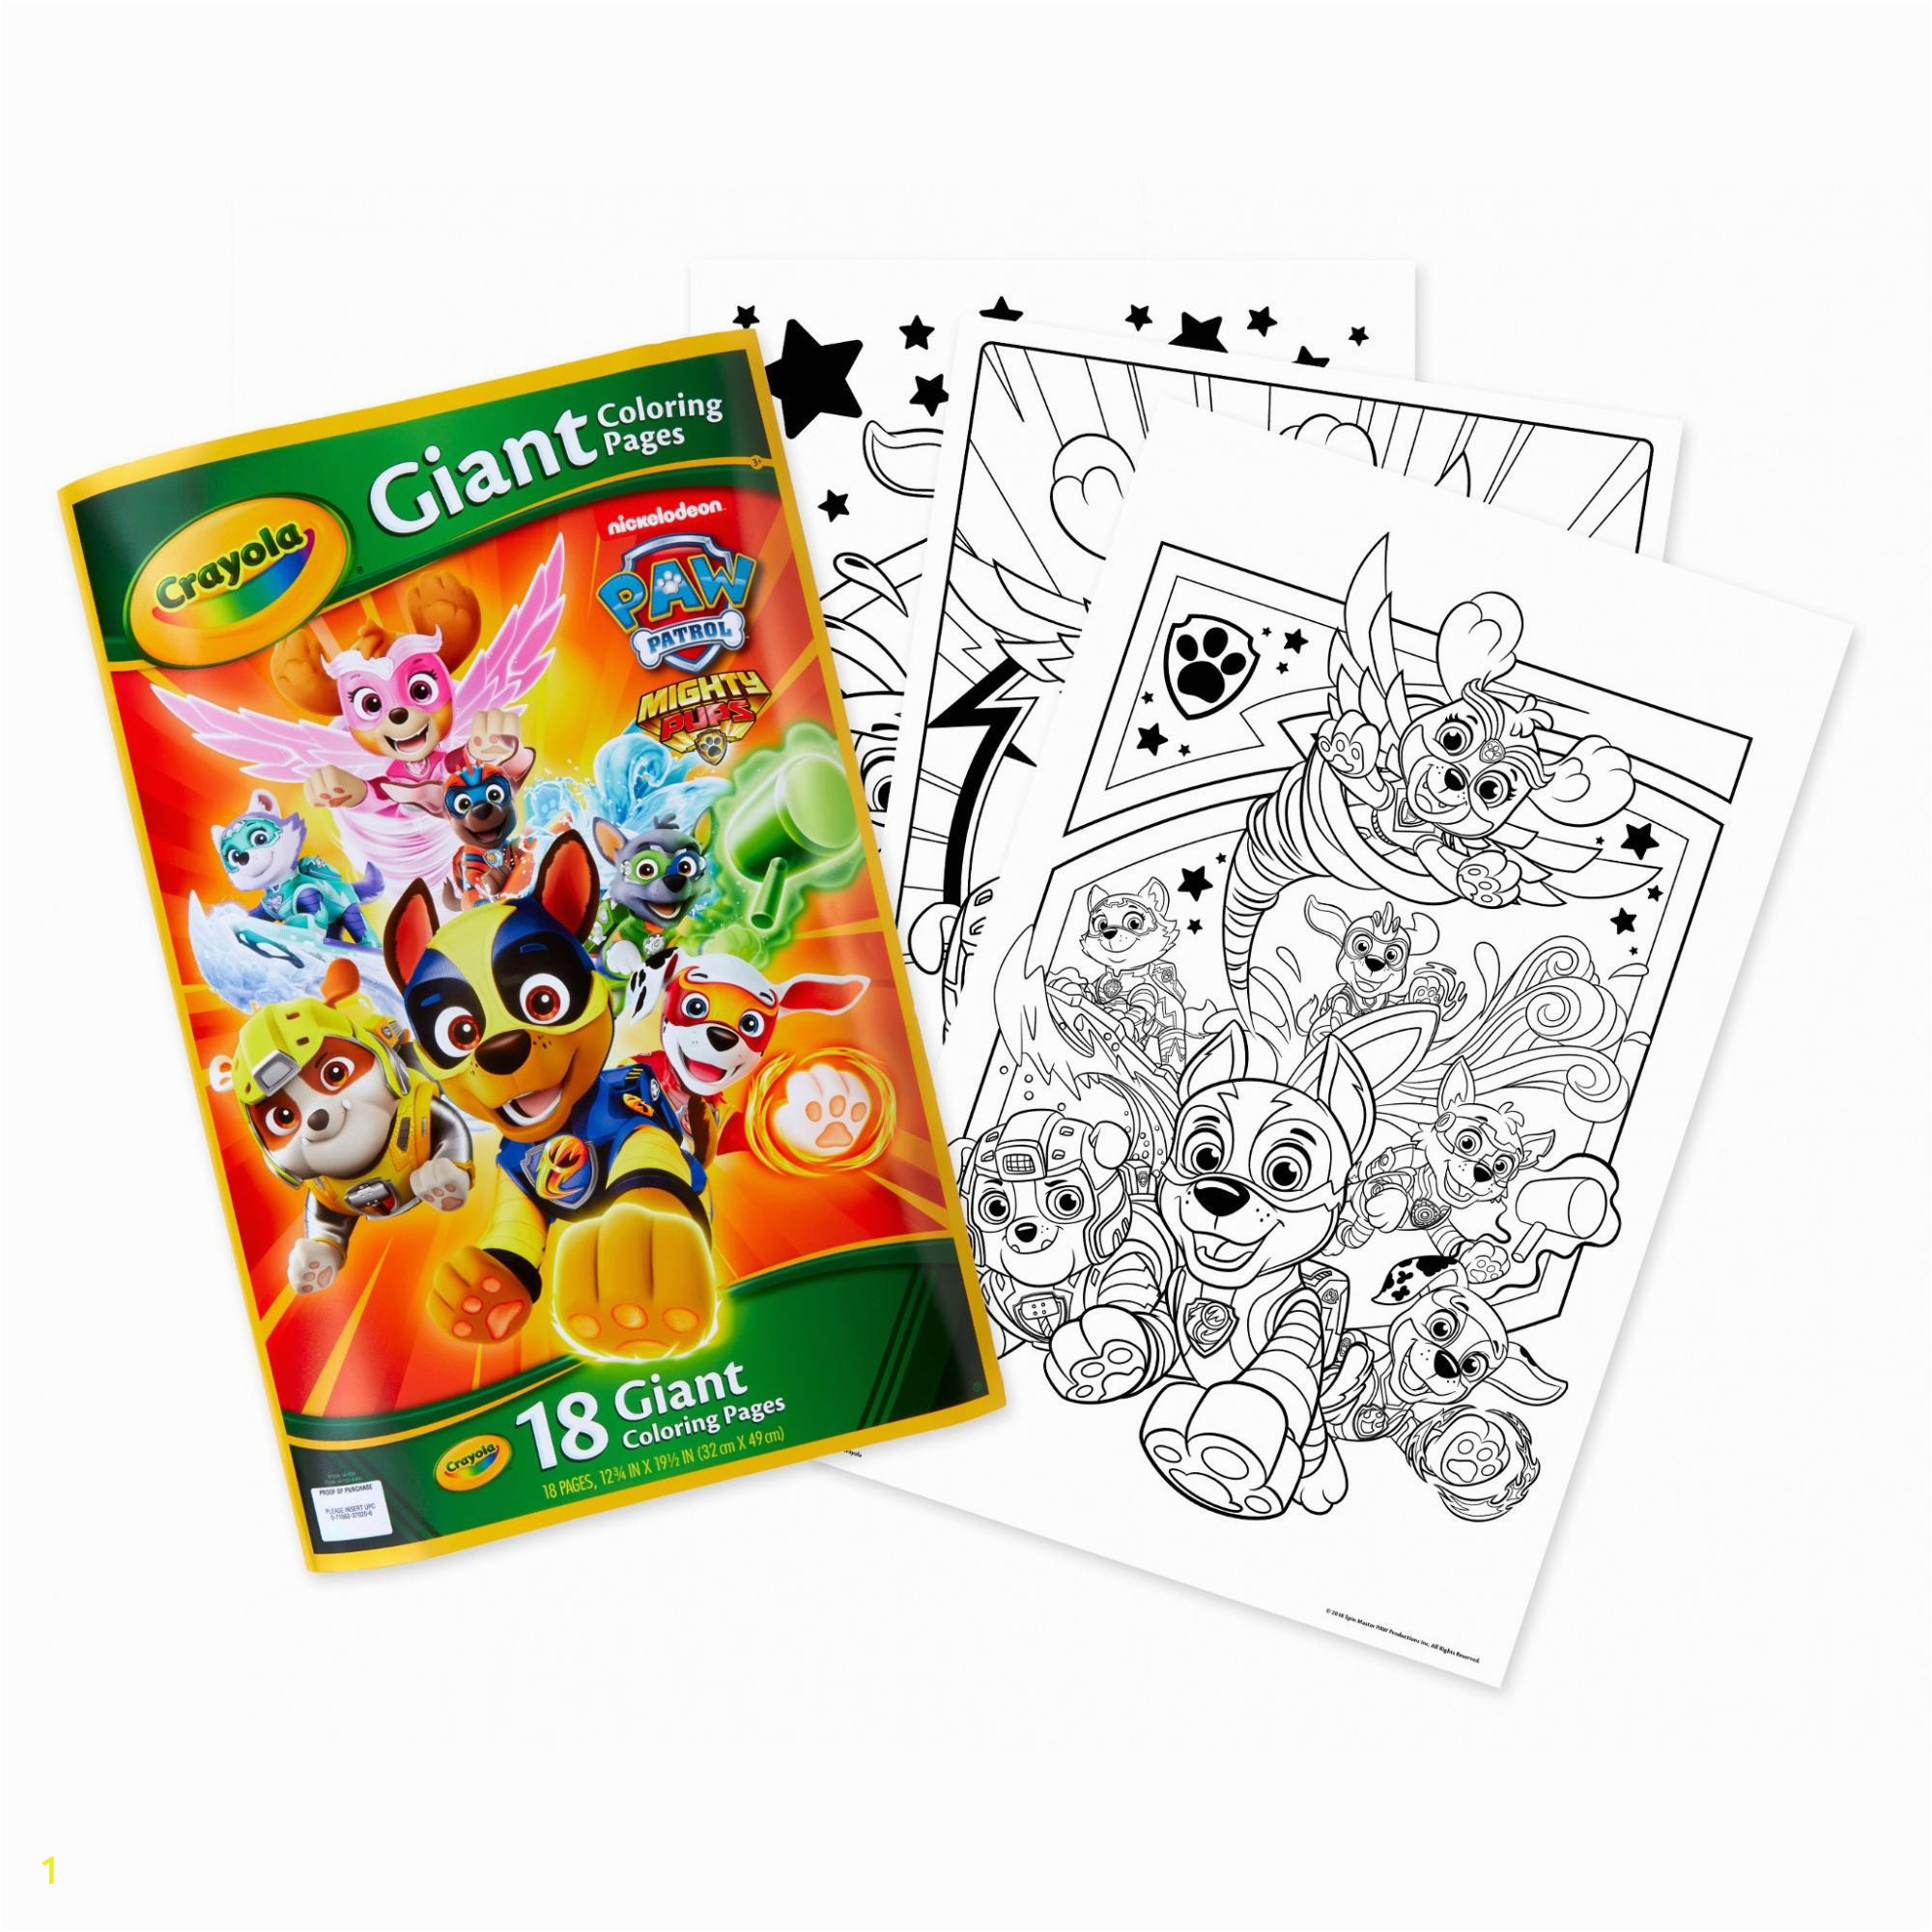 paw patrol coloring book the macmillan alice colouring eragon page of unicorn muscle winter pages for kids travel william morris curse word zen mandala wreck it ralph pumpkin adults